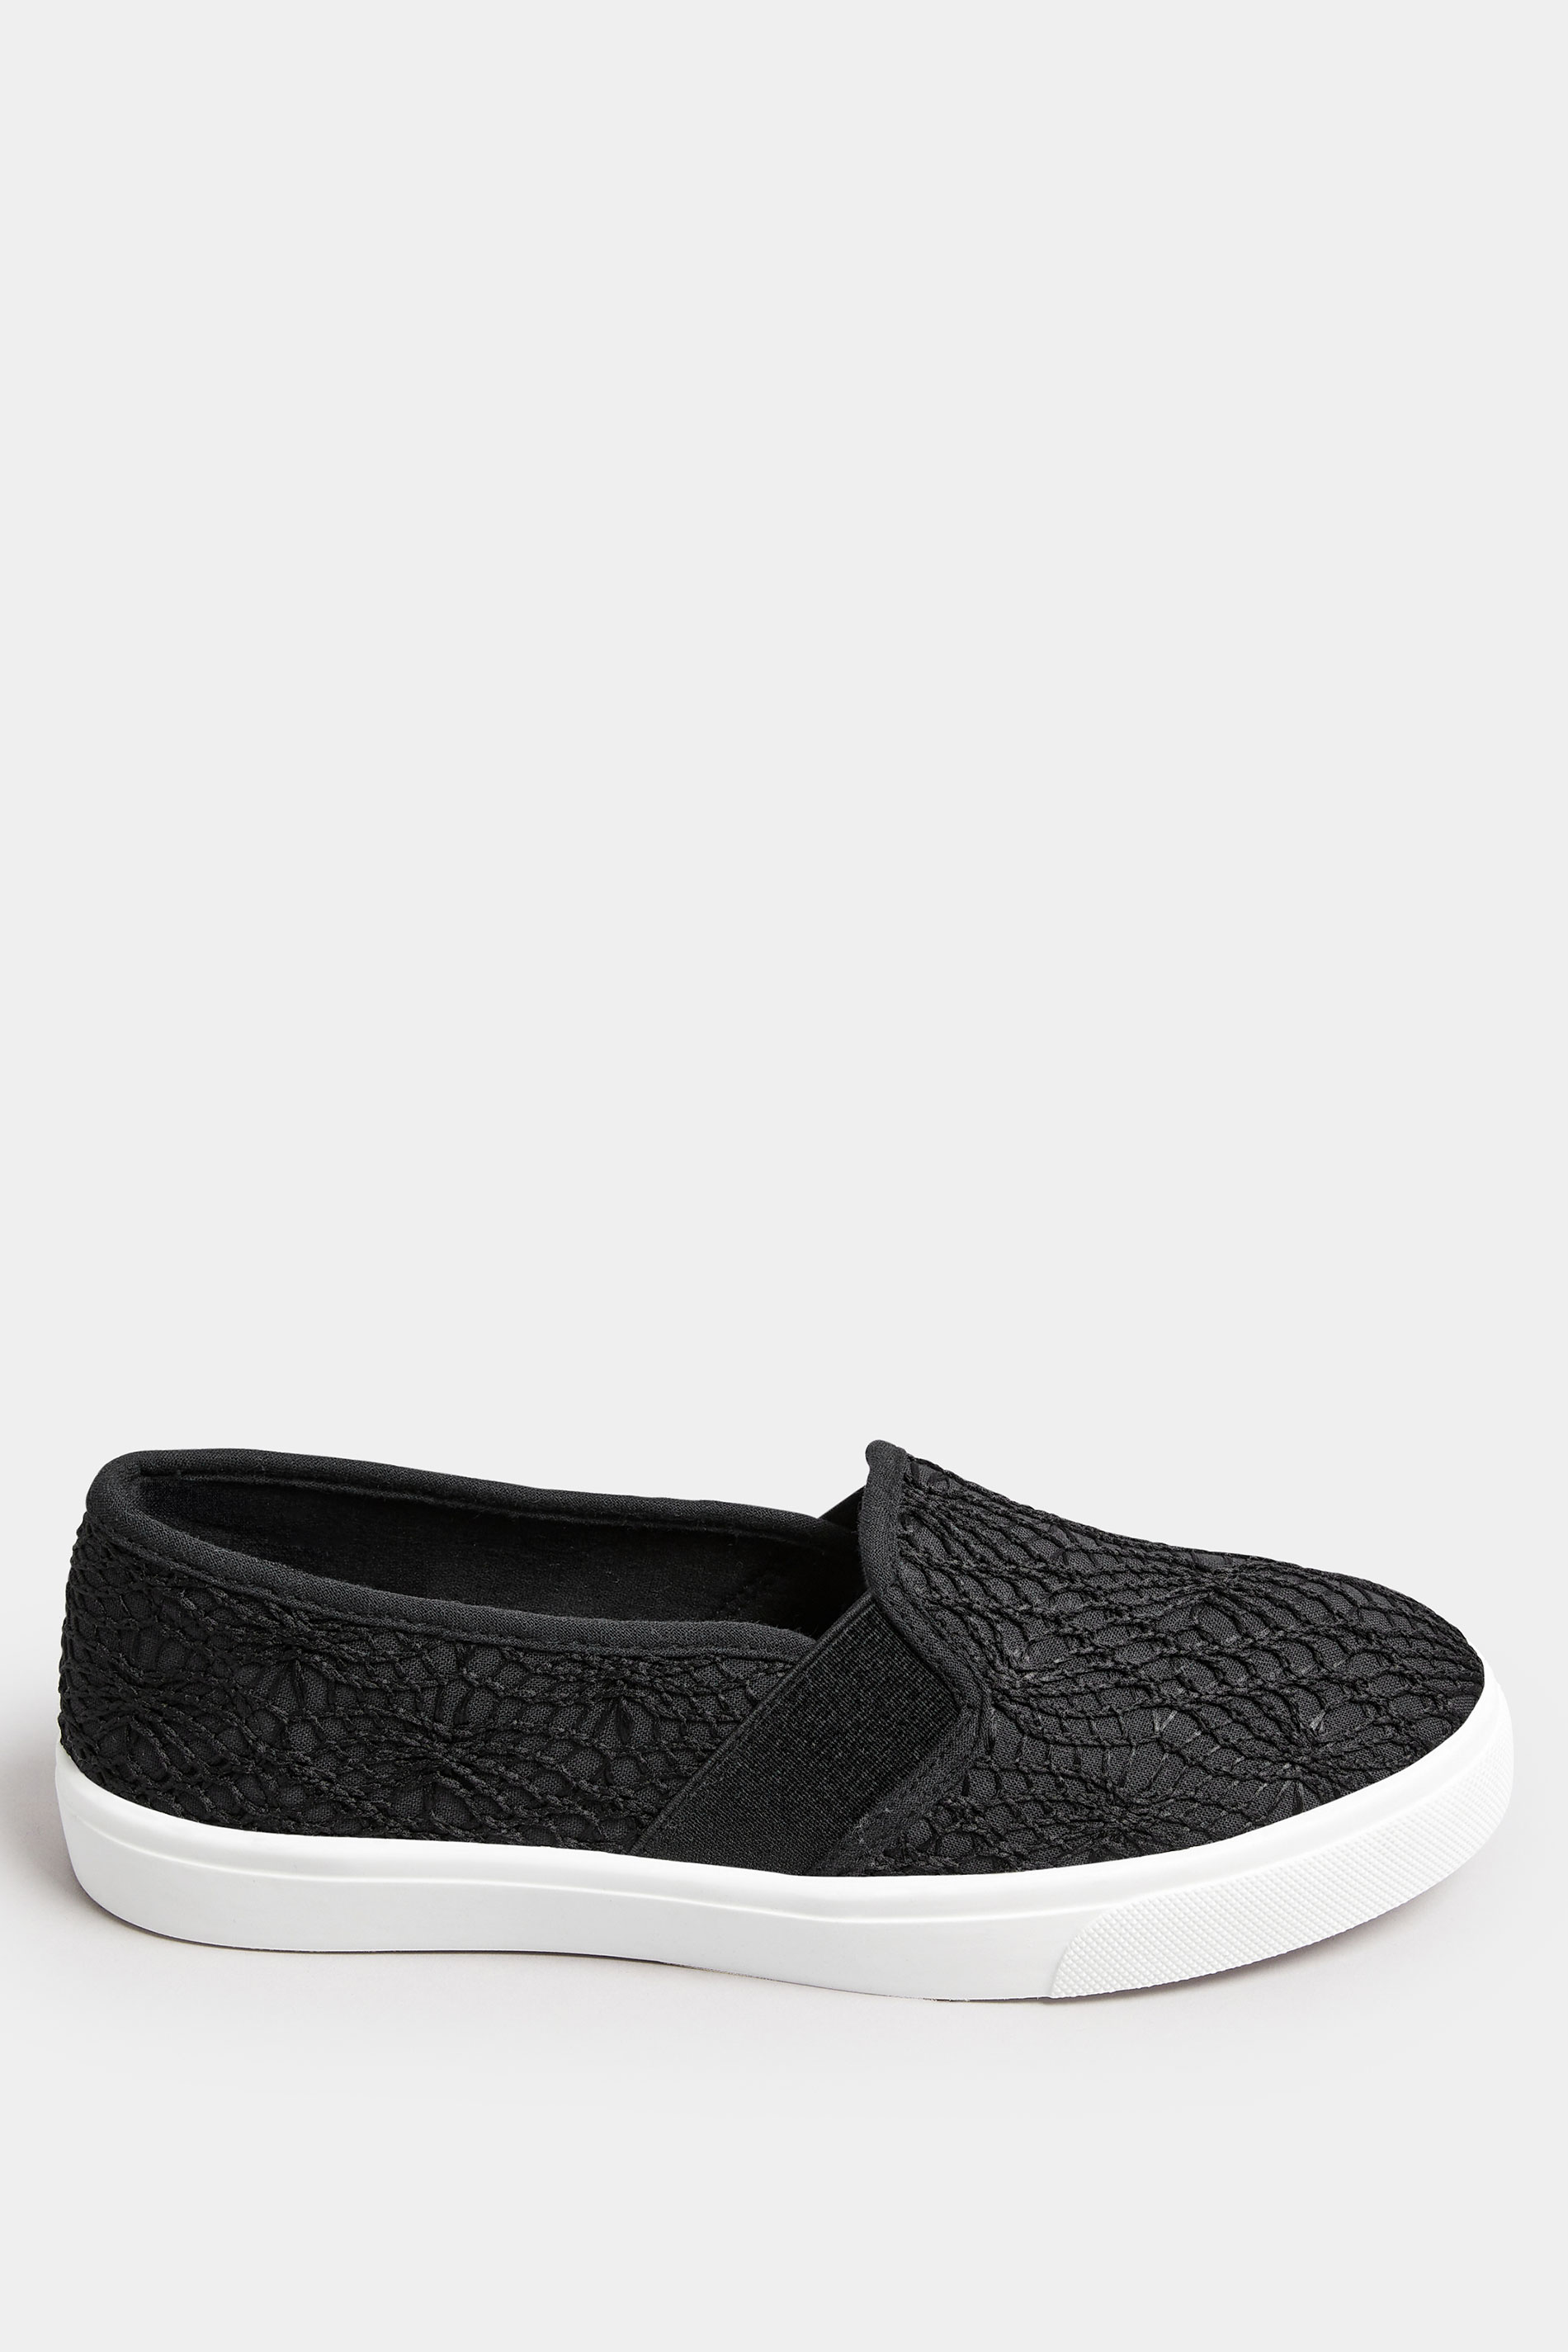 Black Broderie Anglaise Slip-On Trainers In Wide E Fit | Yours Clothing 3